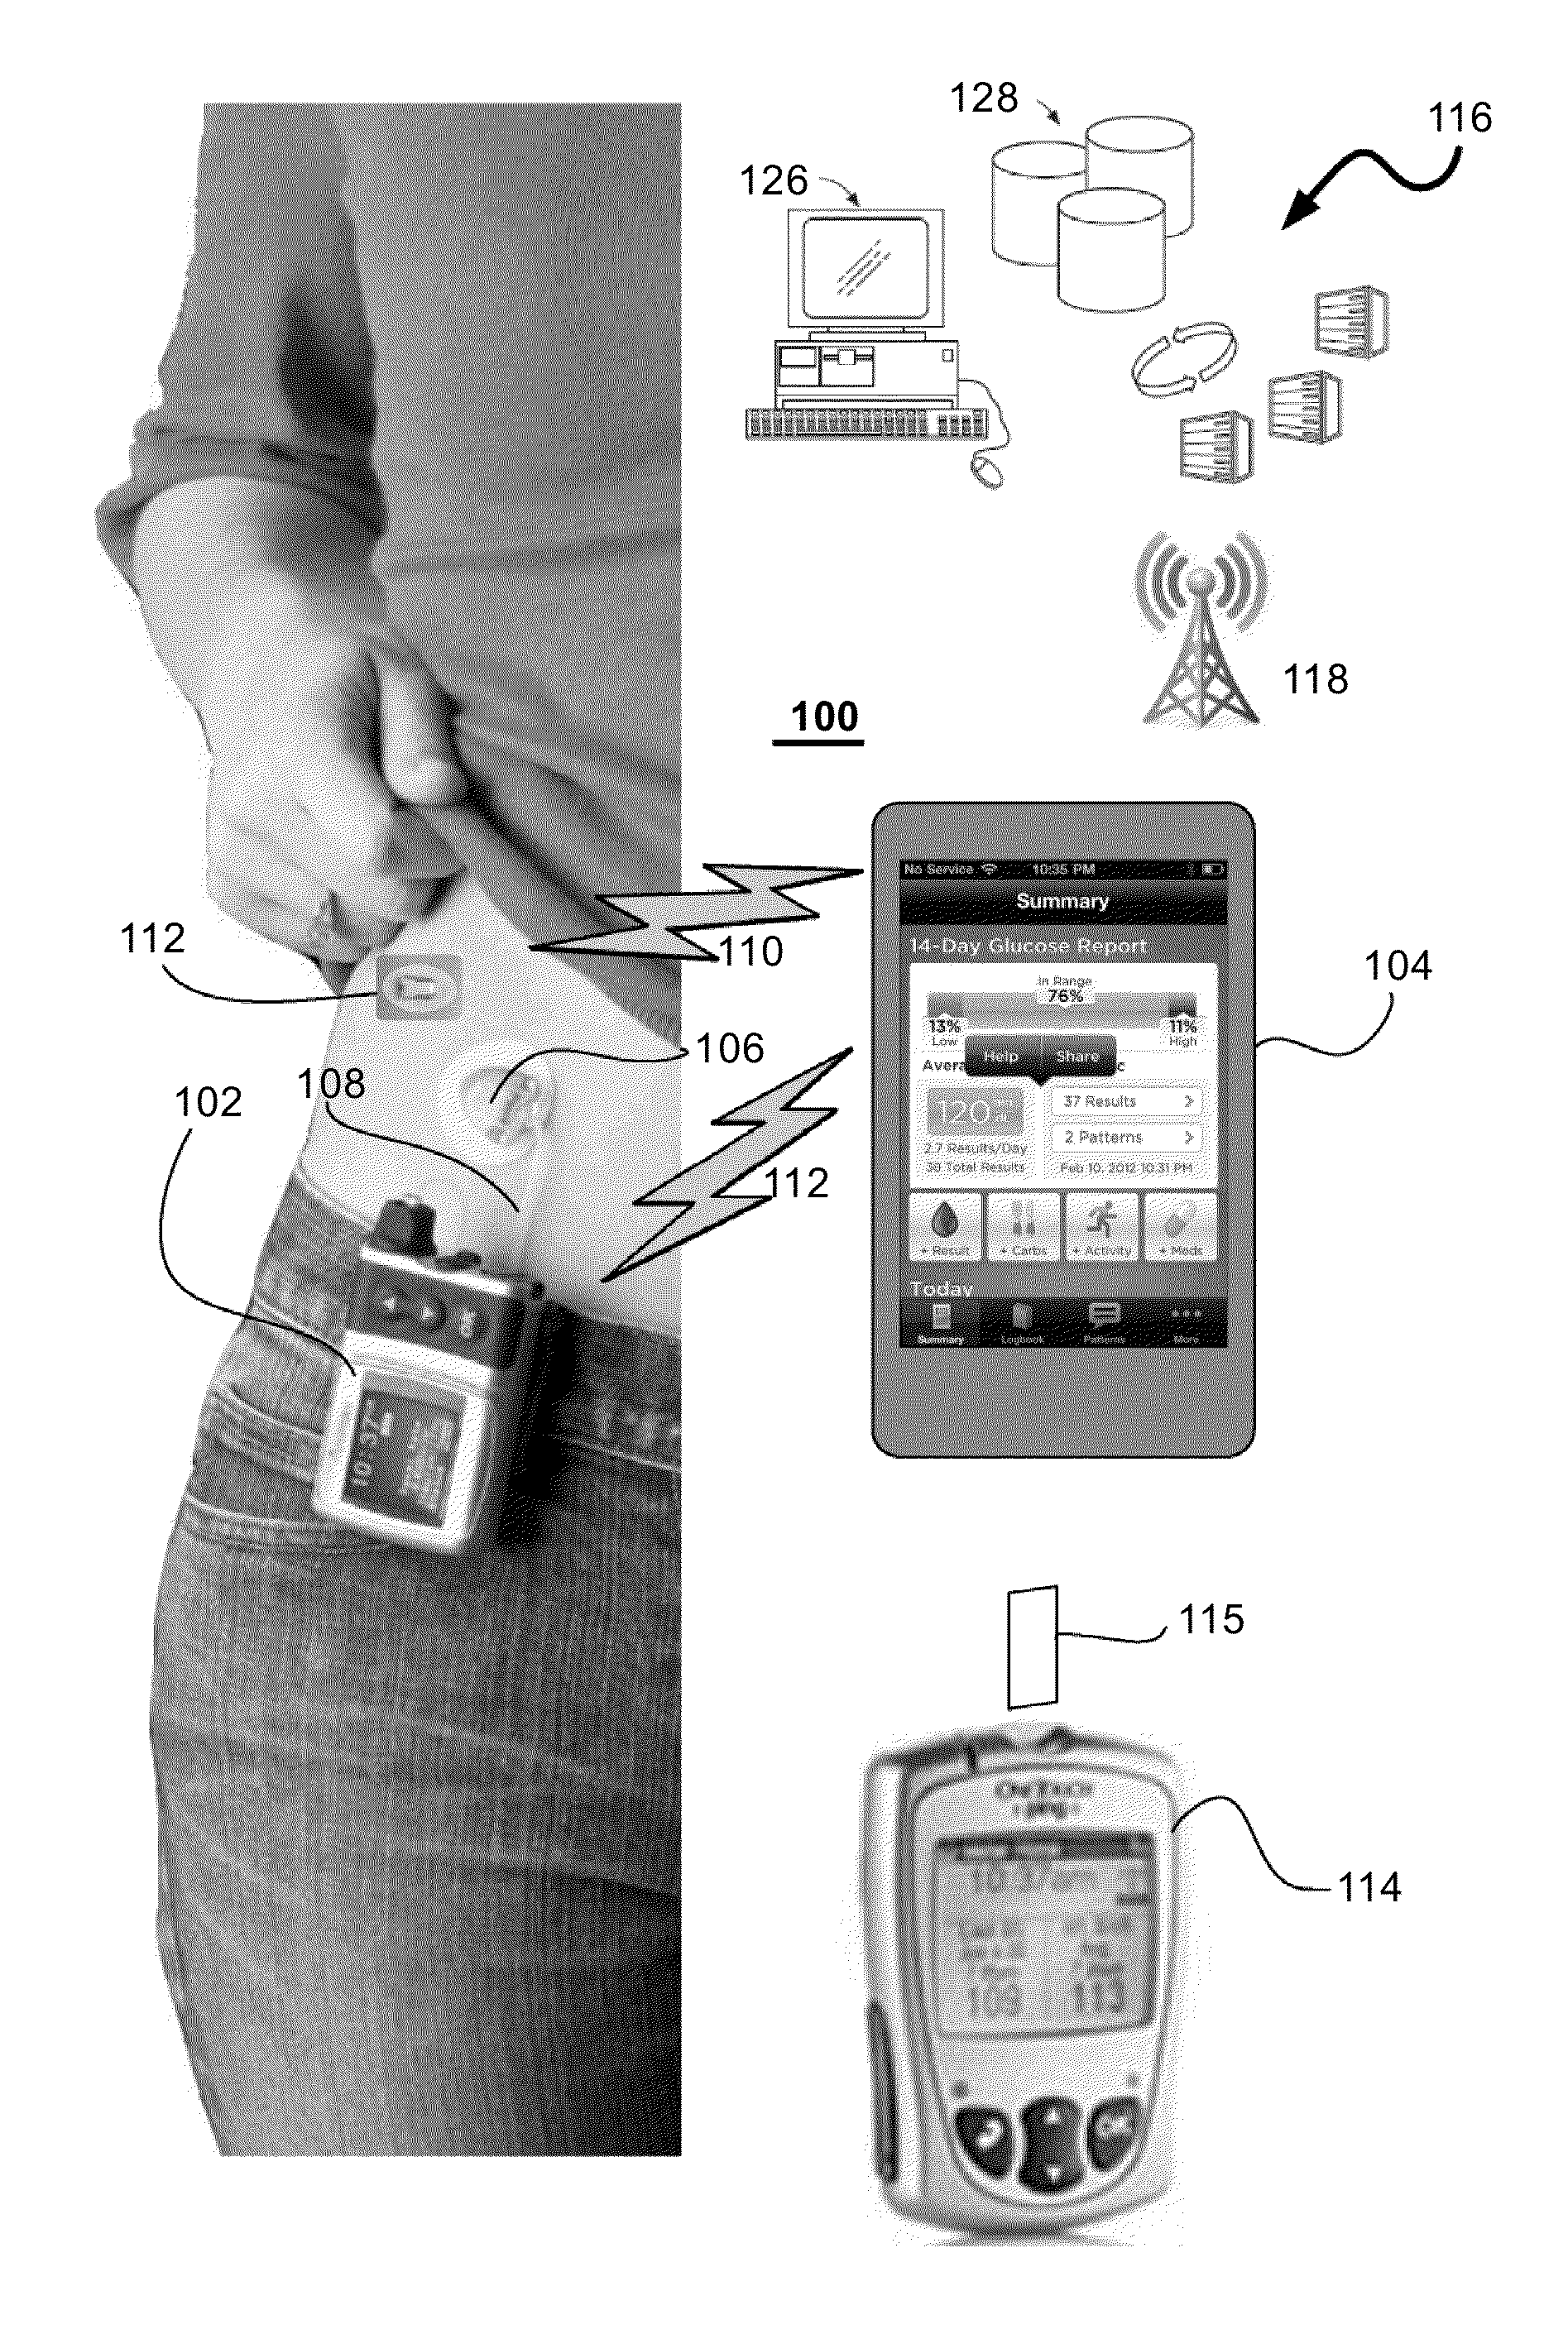 Method and System for Closed-Loop Control of an Artificial Pancreas